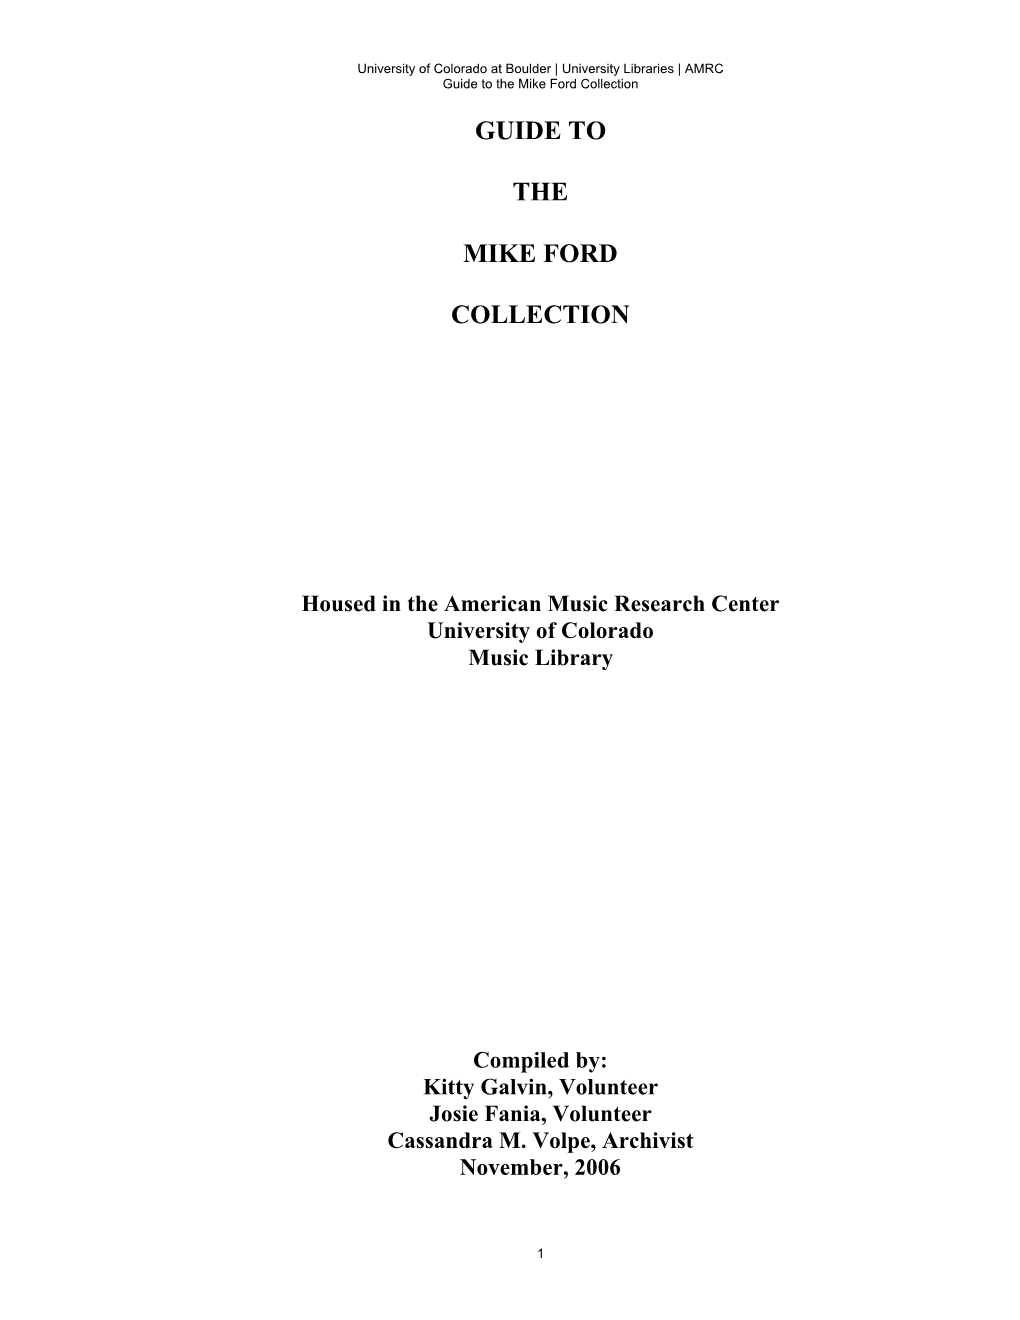 Guide to the Mike Ford Collection